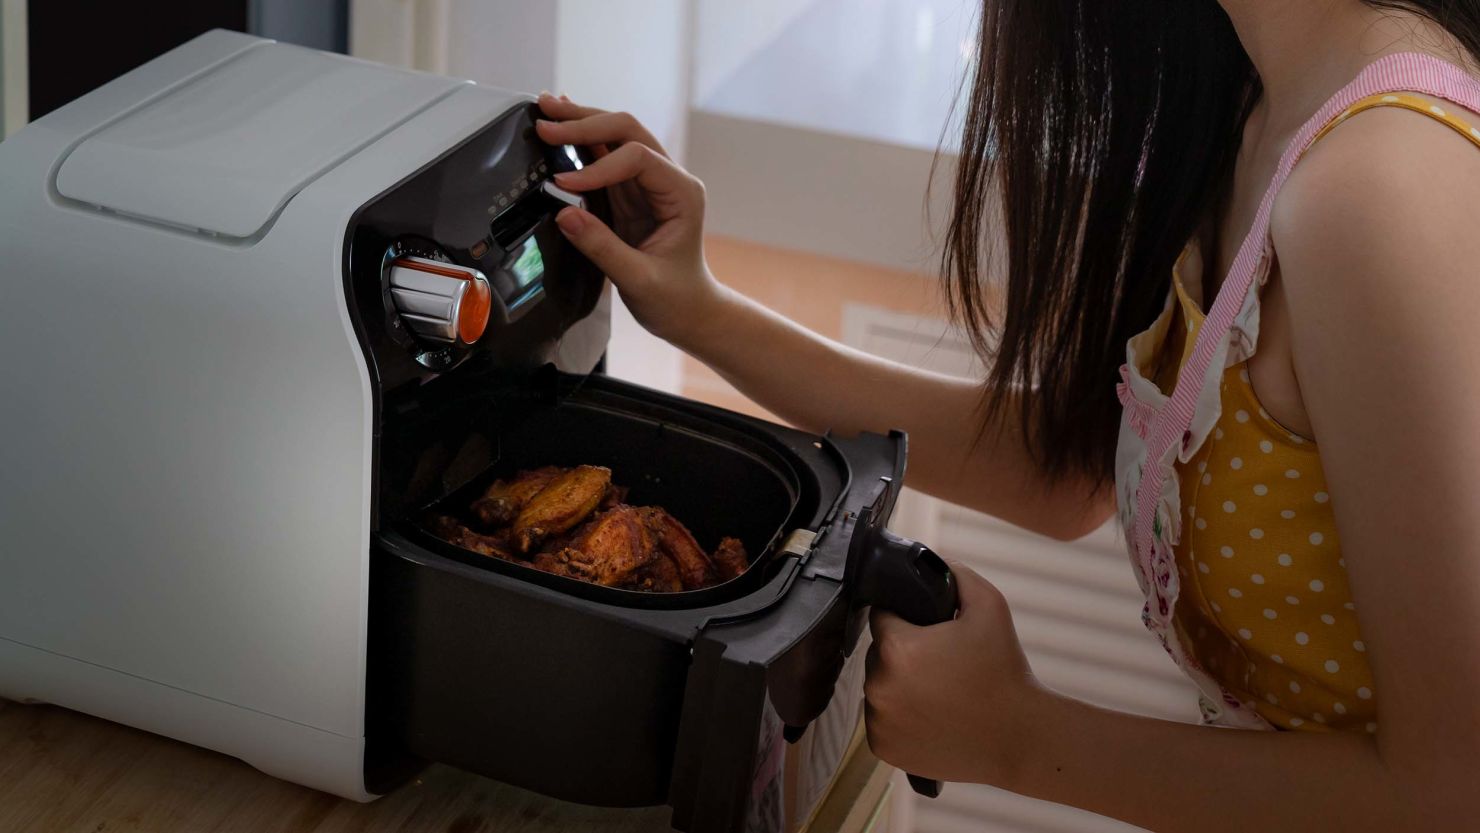 Easy hack lets you clean your air fryer in 3 minutes with ZERO